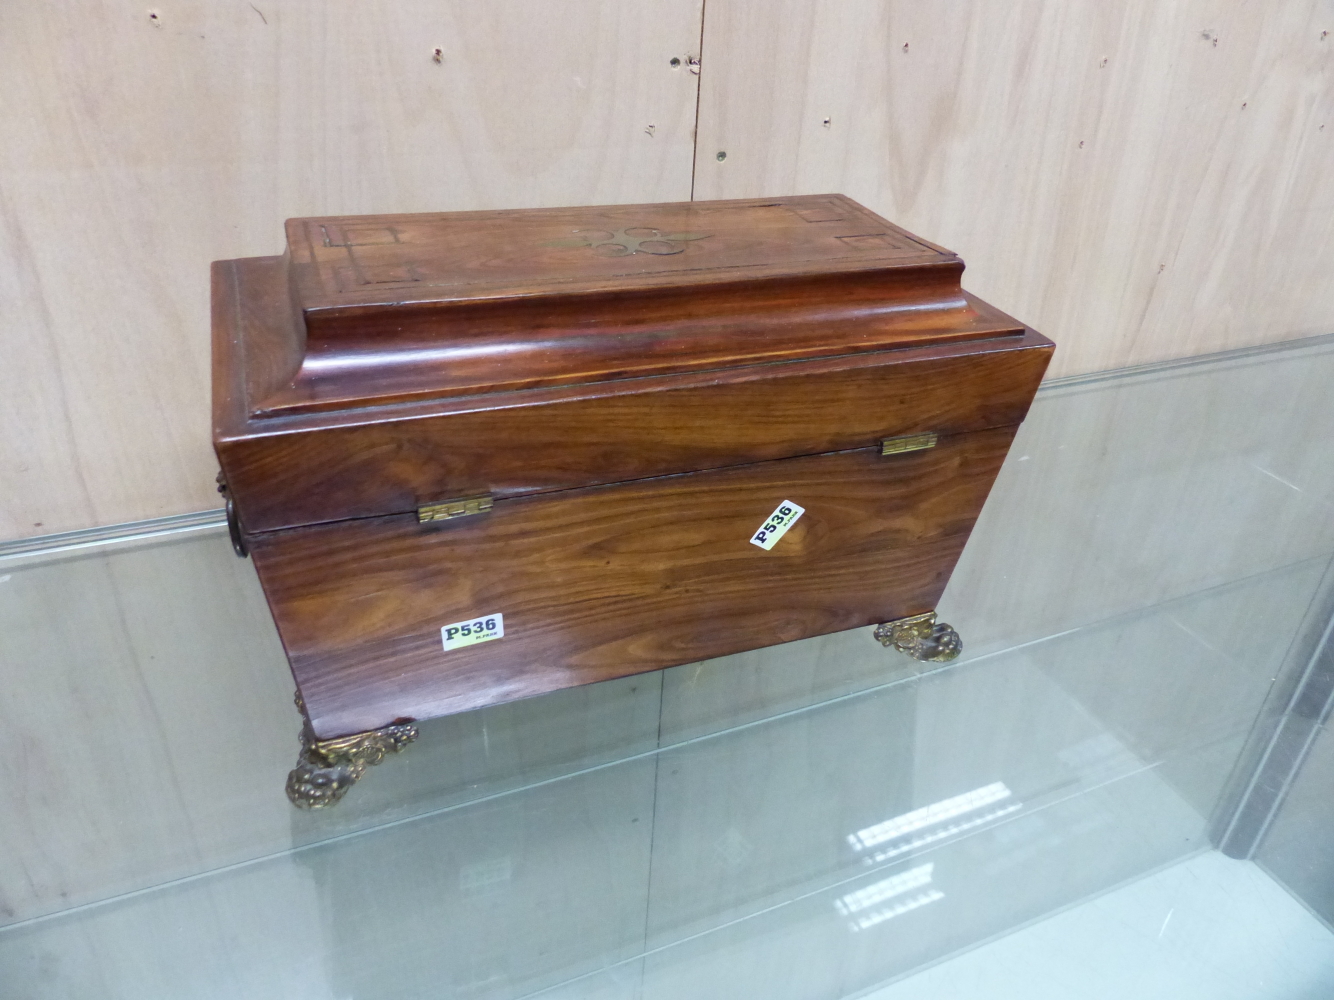 A REGENCY ROSEWOOD AND BRASS INLAID SARCOPHAGUS FORM TEA CADDY WITH BRASS RING HANDLES AND FEET. W. - Image 7 of 7